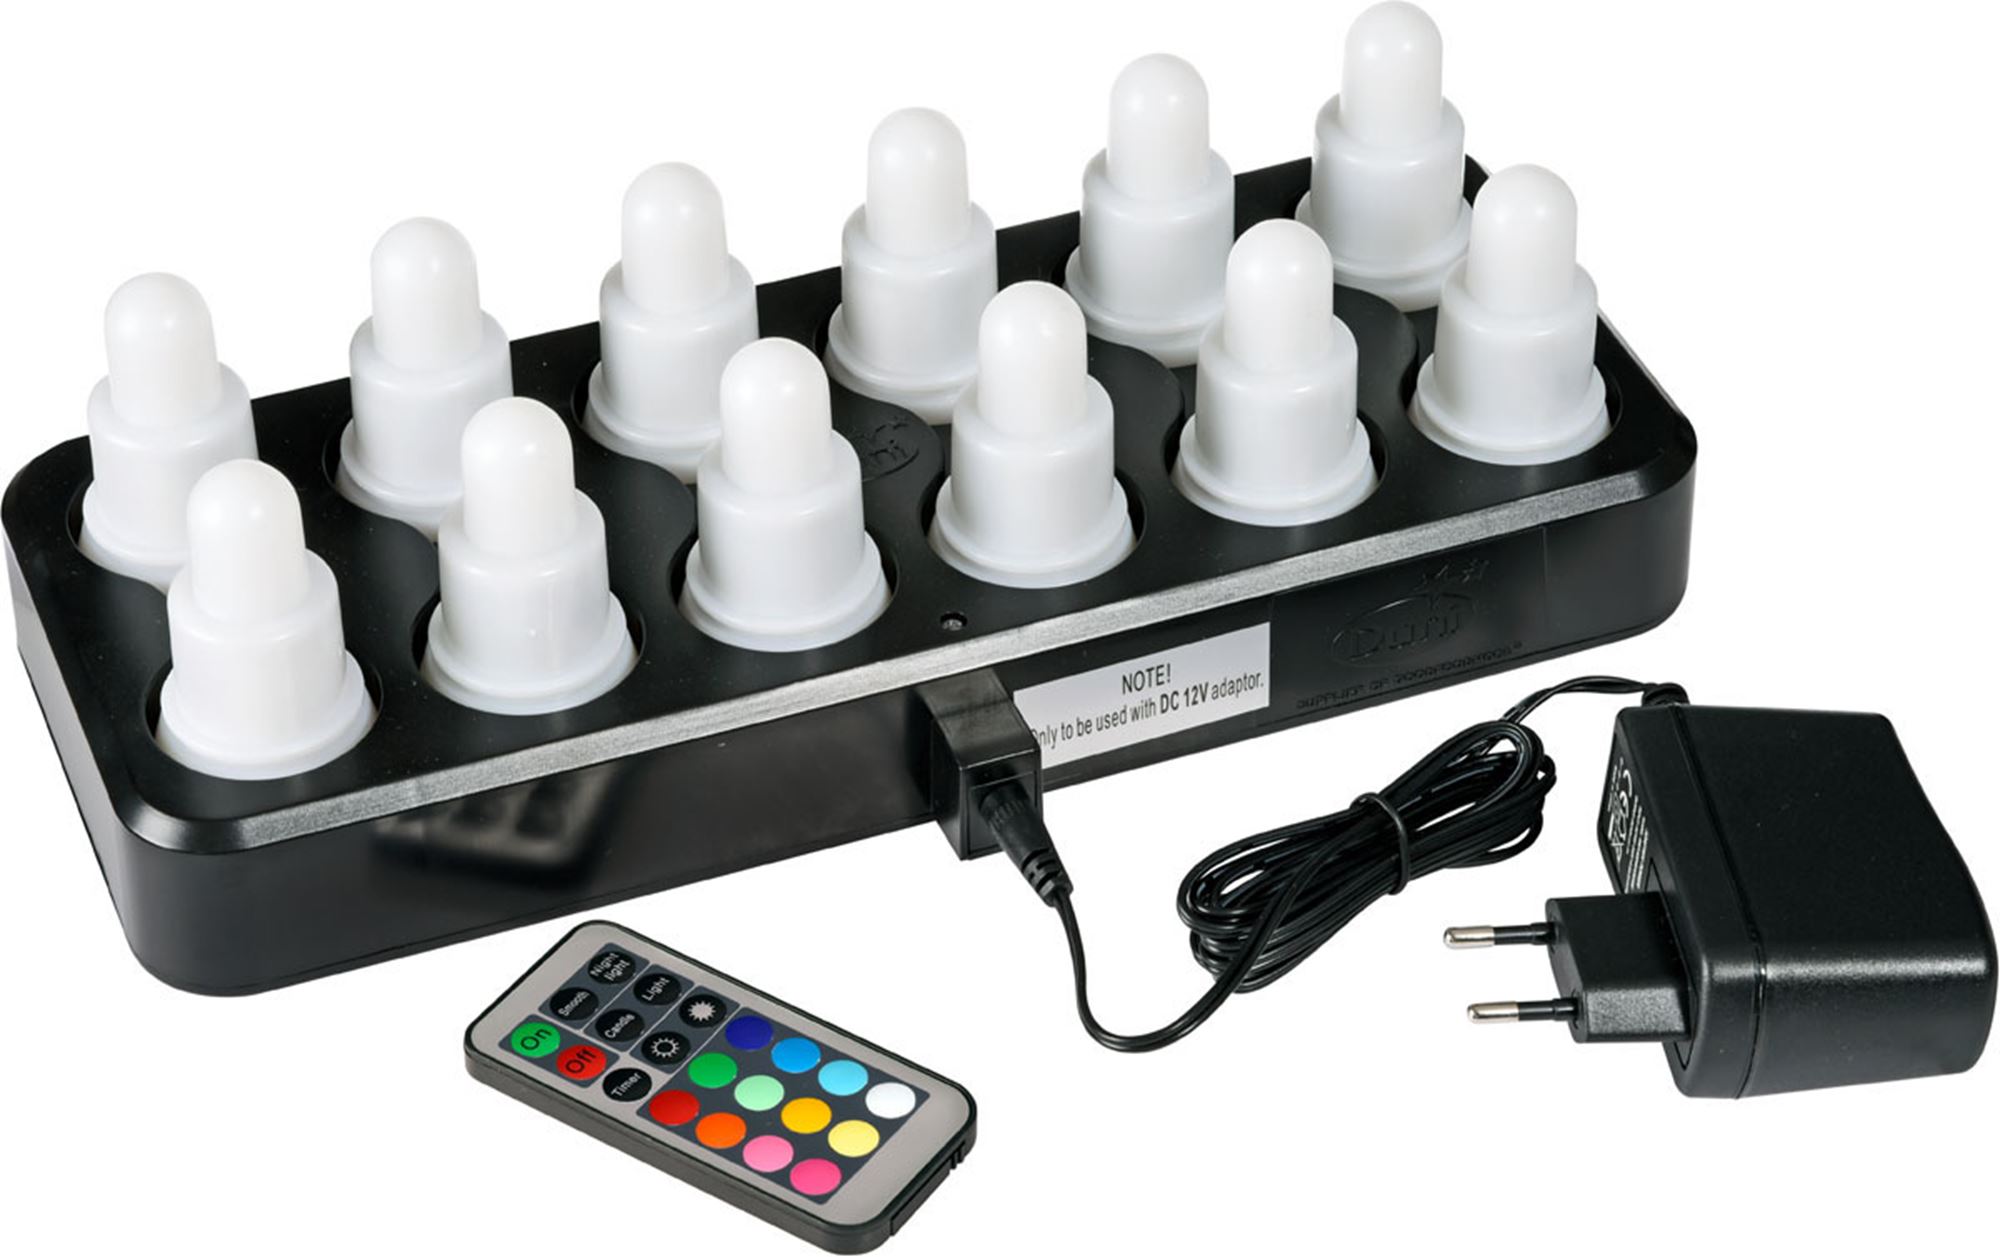 12 bougies led rechargeables - Voussert